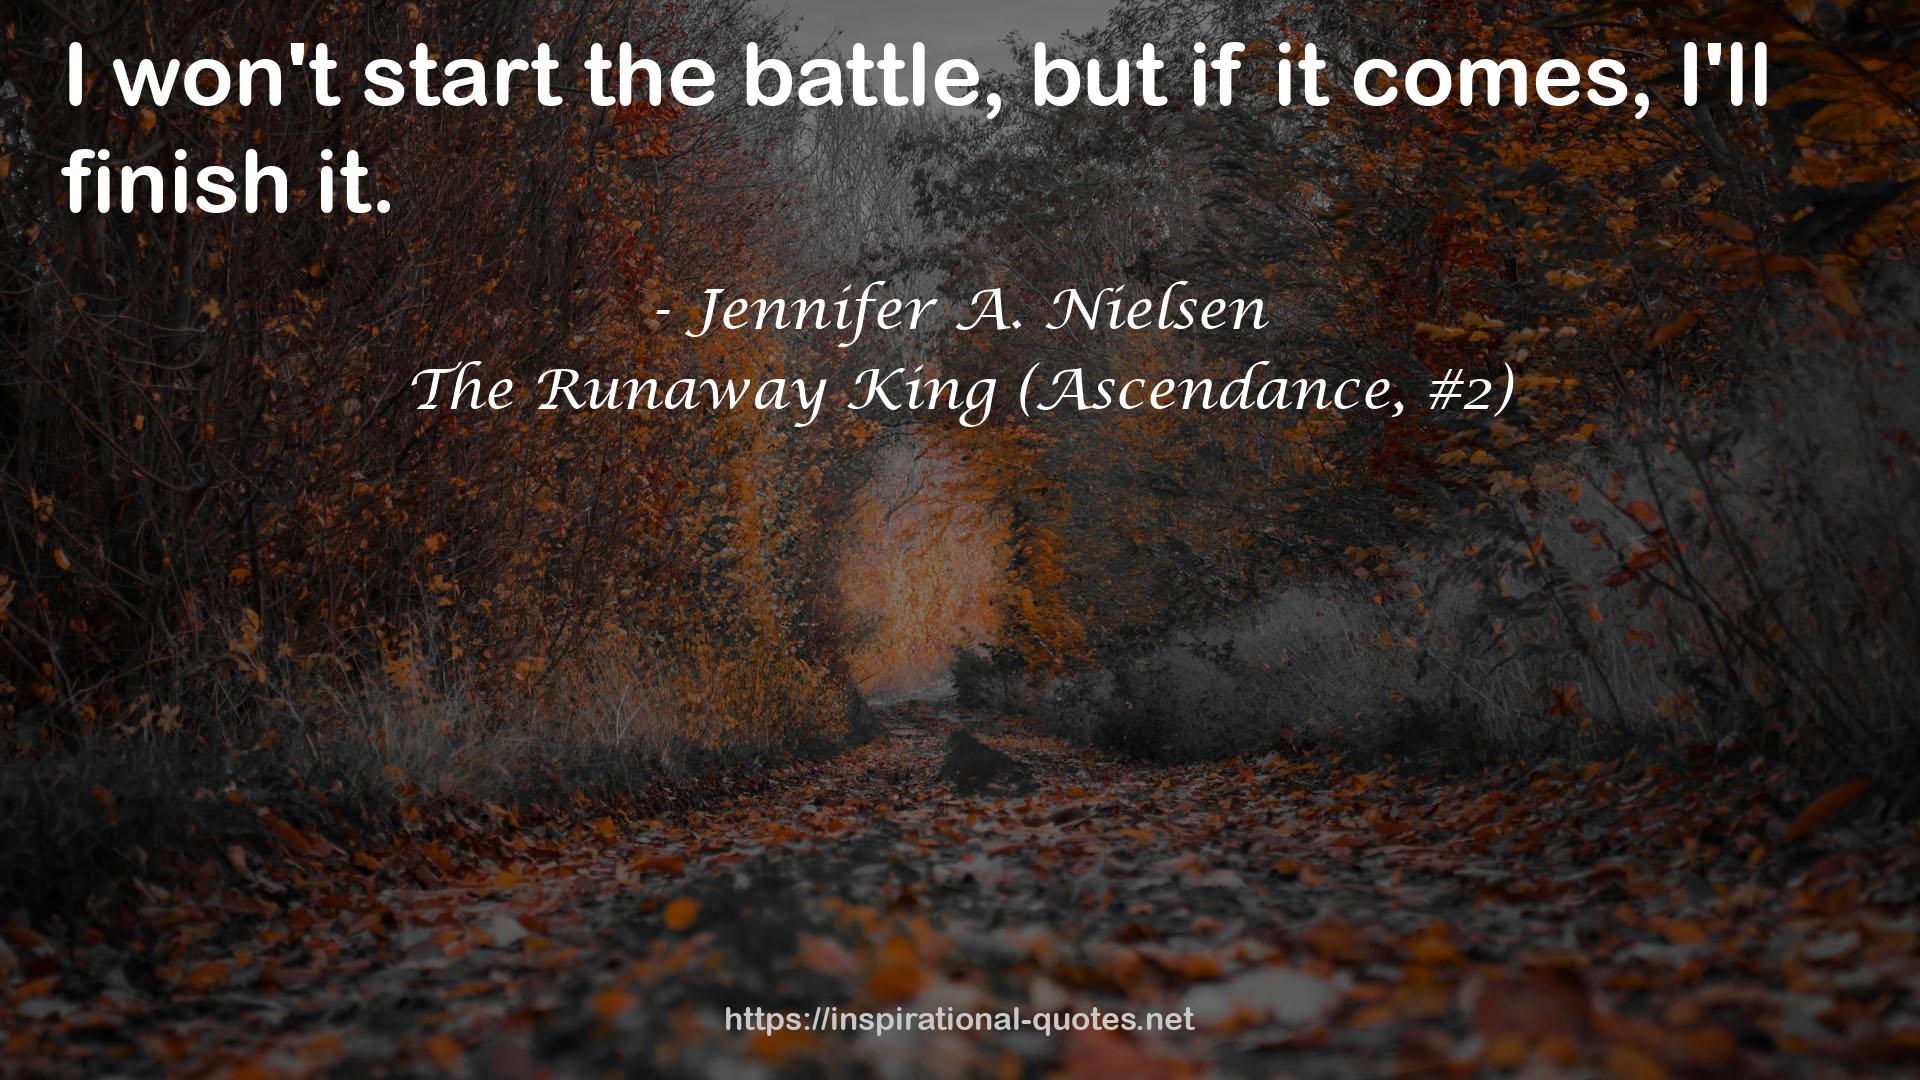 The Runaway King (Ascendance, #2) QUOTES